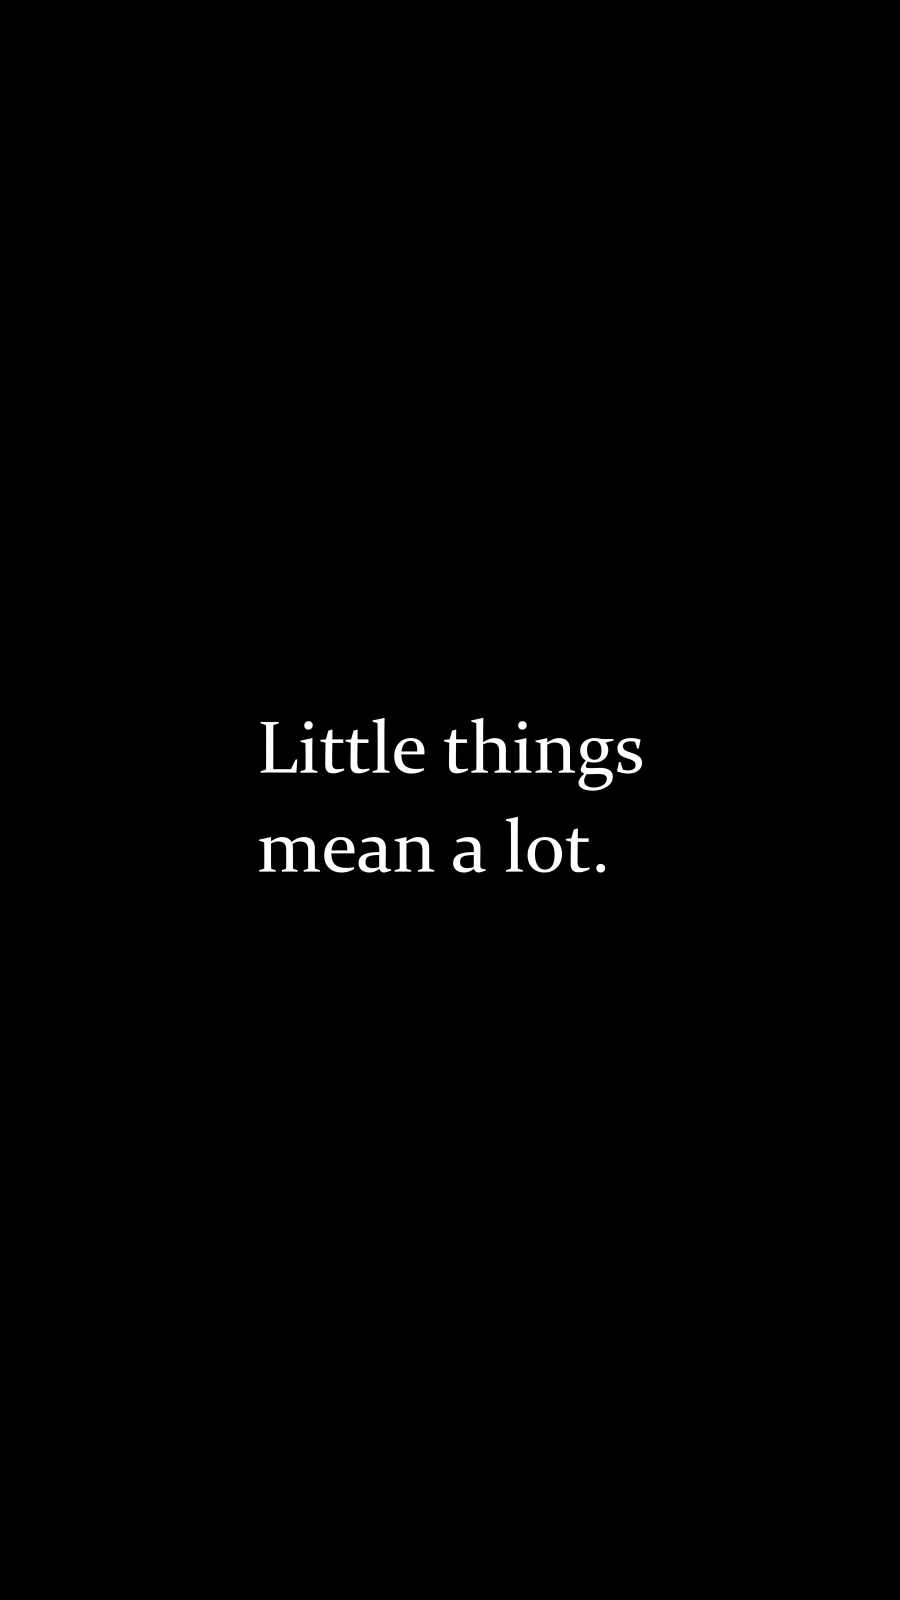 Little Things Mean Alot iPhone Wallpaper